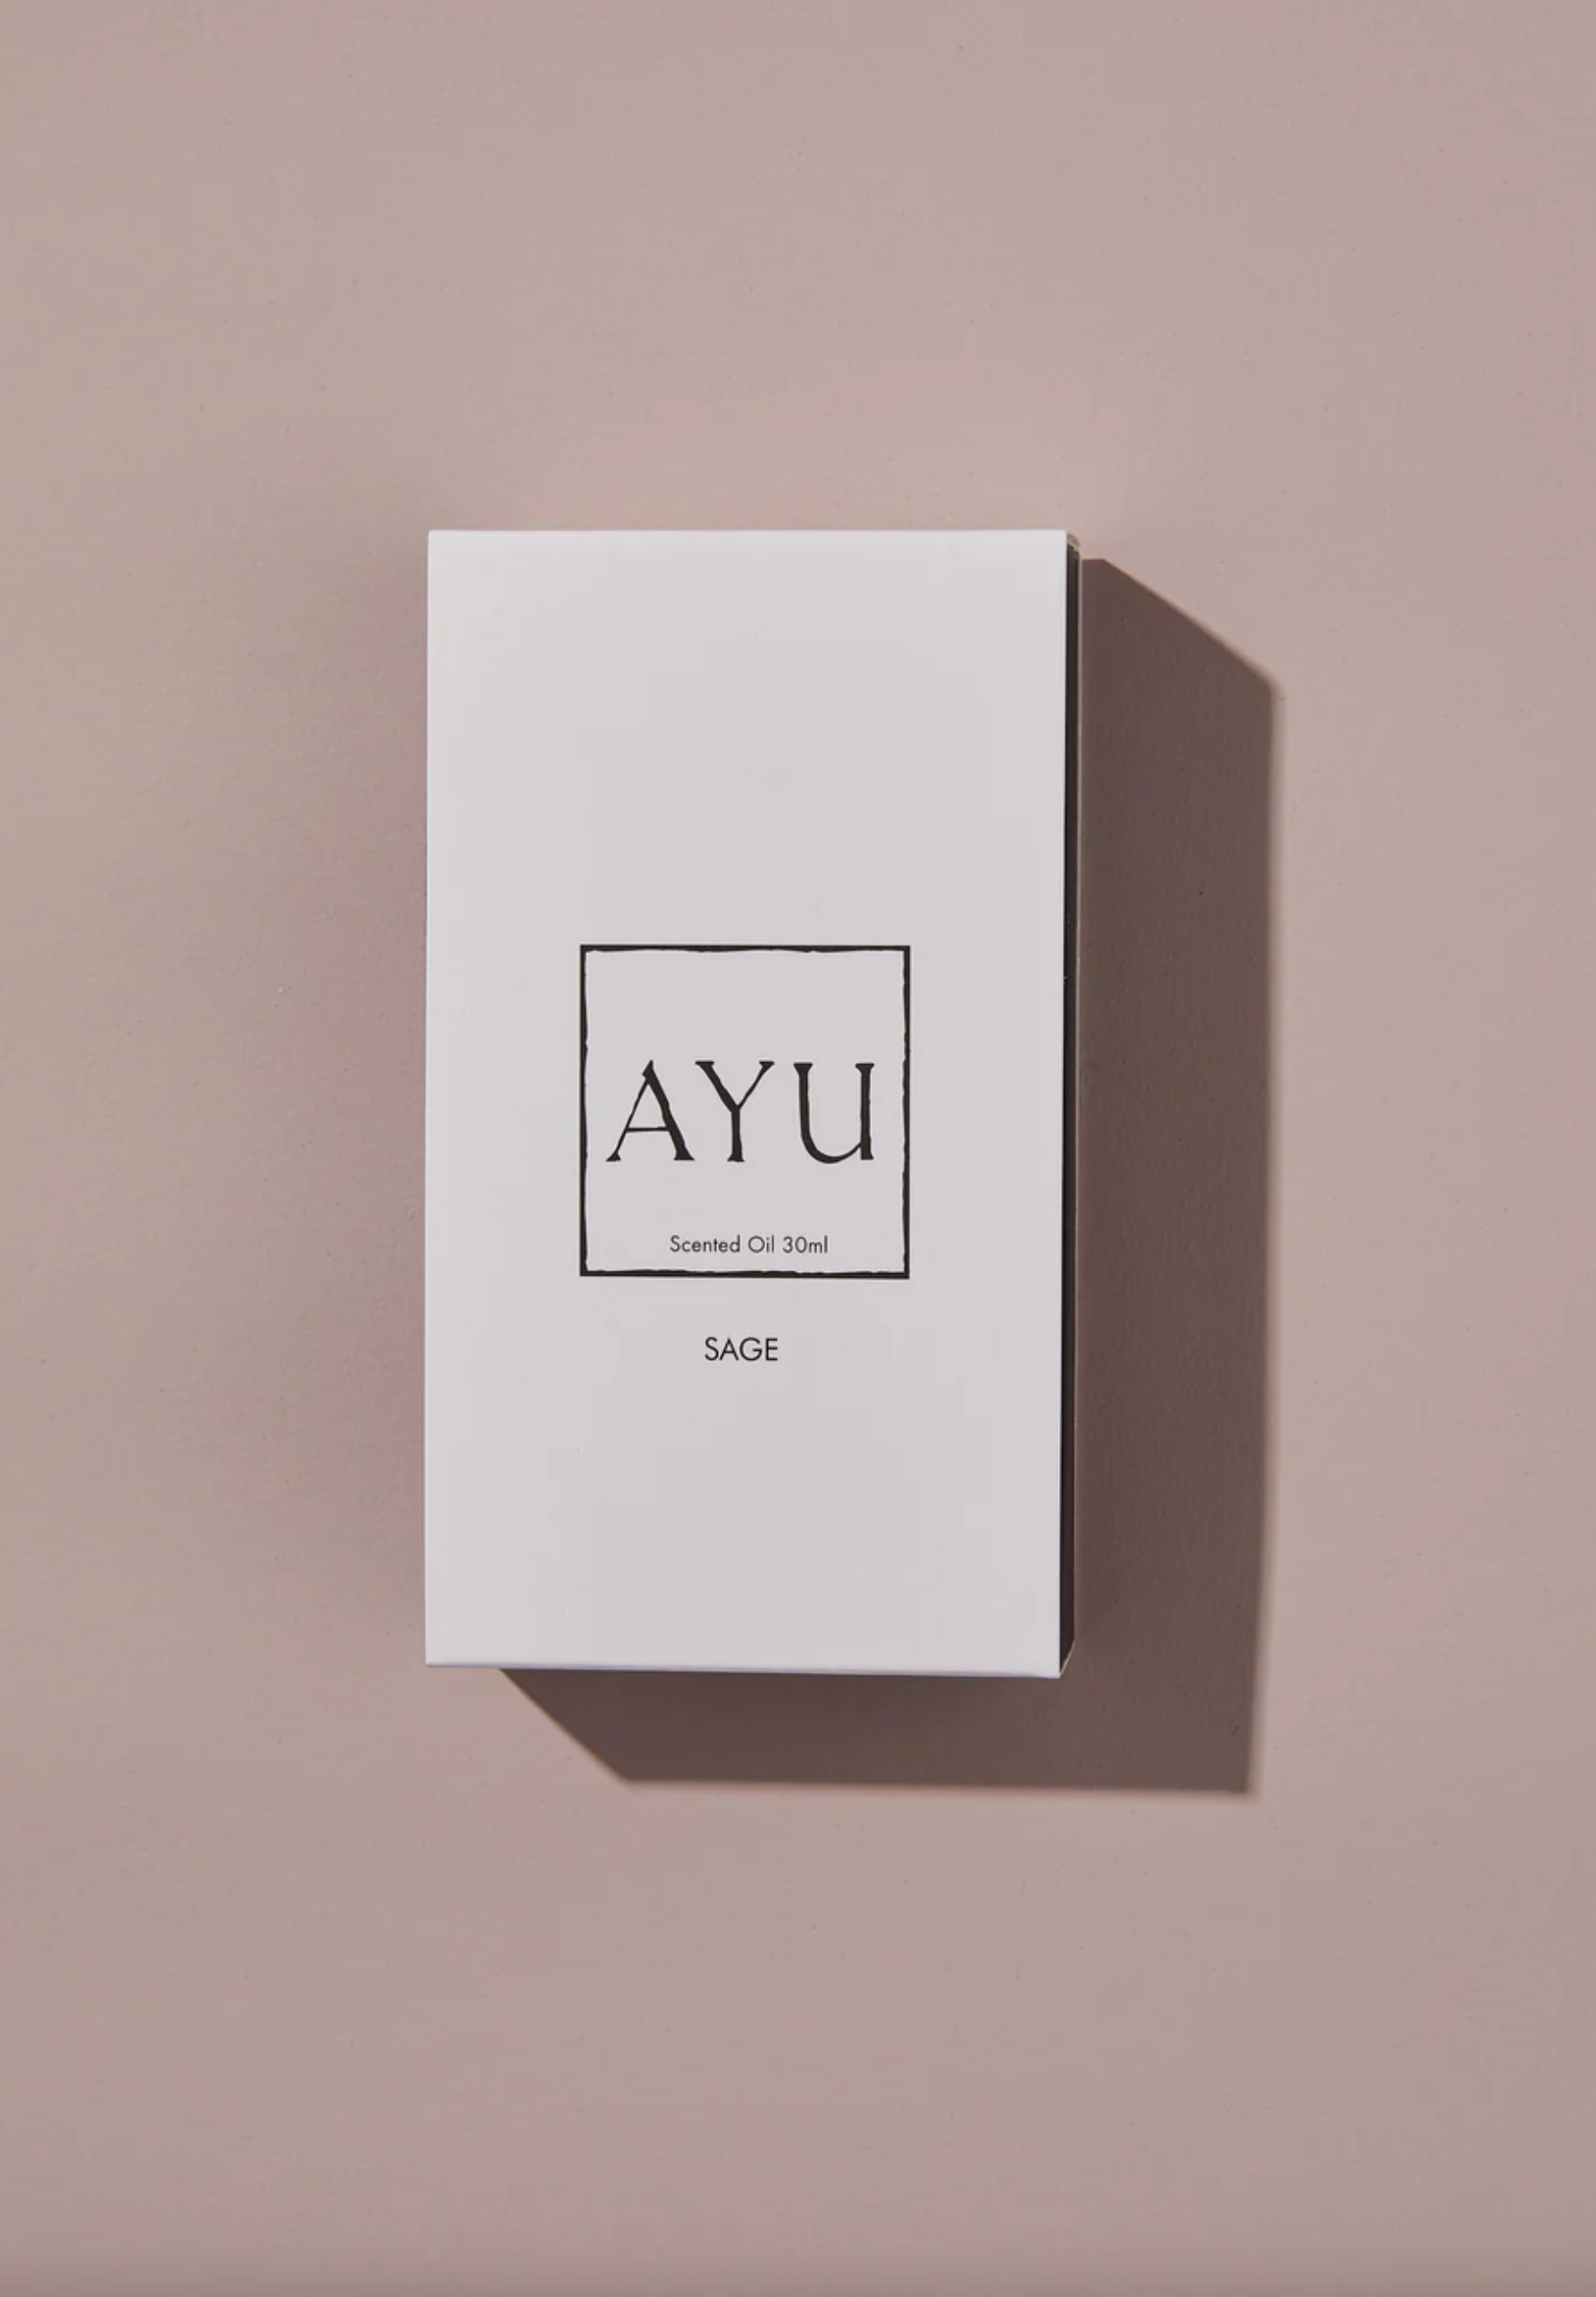 Scented Perfume Oil - Sage Perfume by Ayu - Prae Store